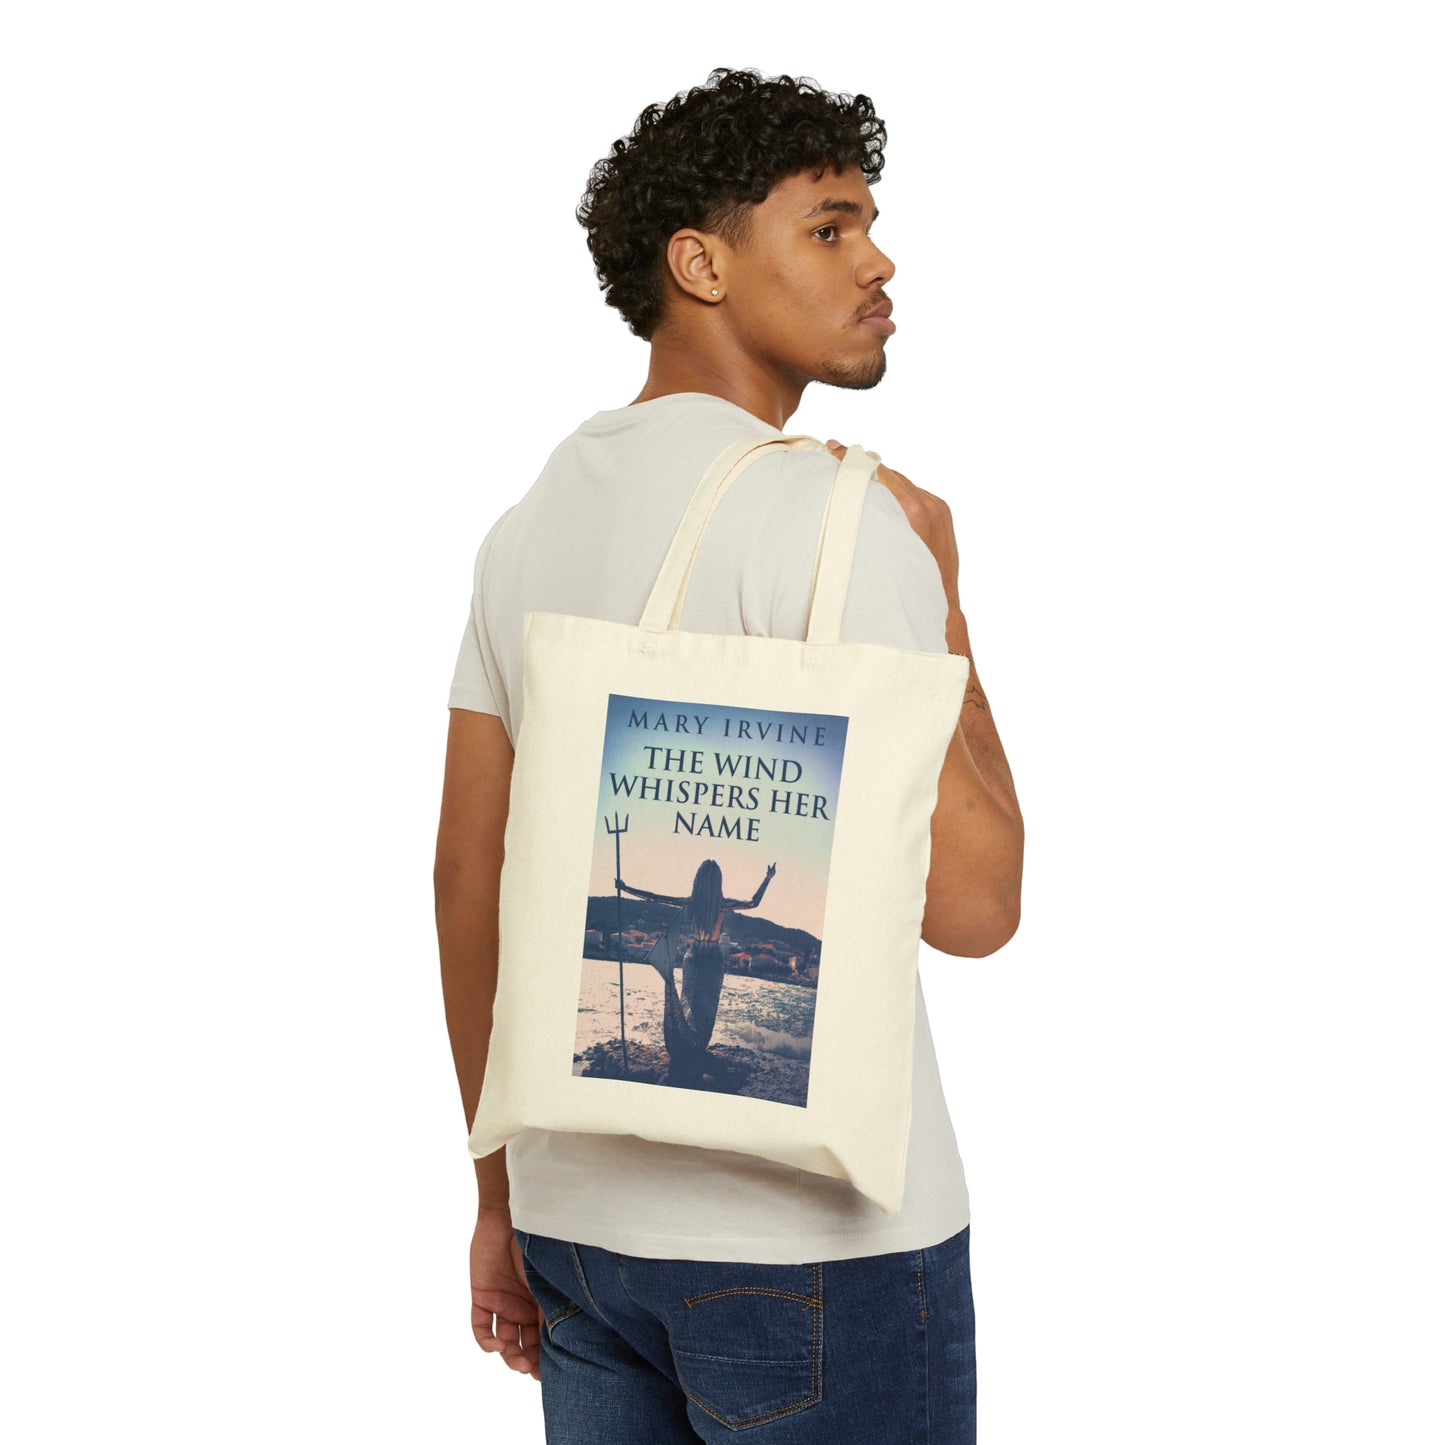 The Wind Whispers Her Name - Cotton Canvas Tote Bag